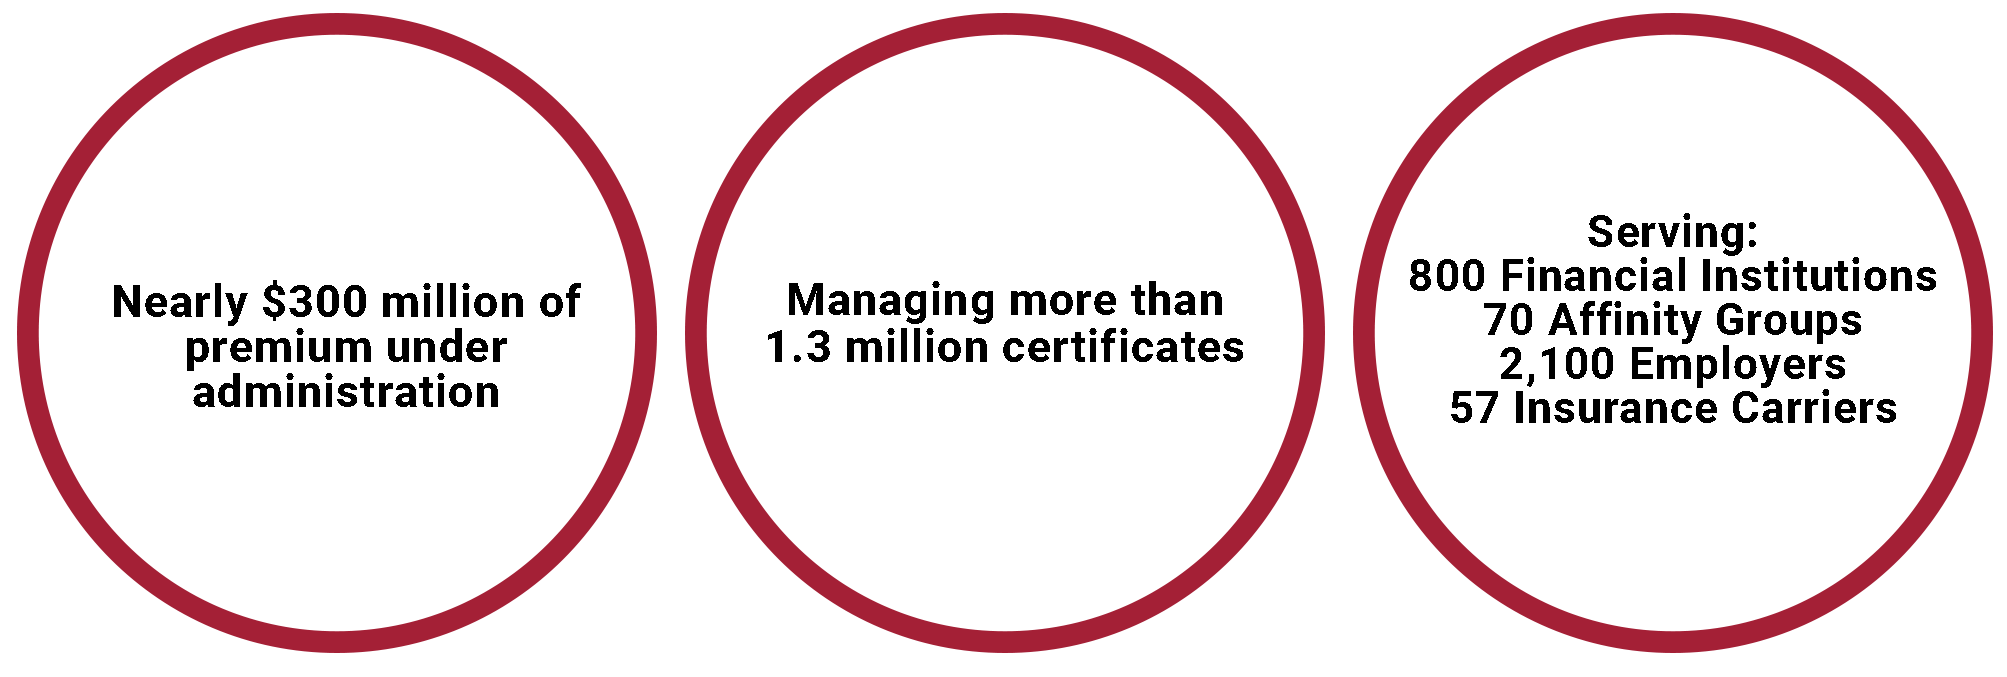 Circles with text about SelmanCo's premium under administration, certificate management, and clients